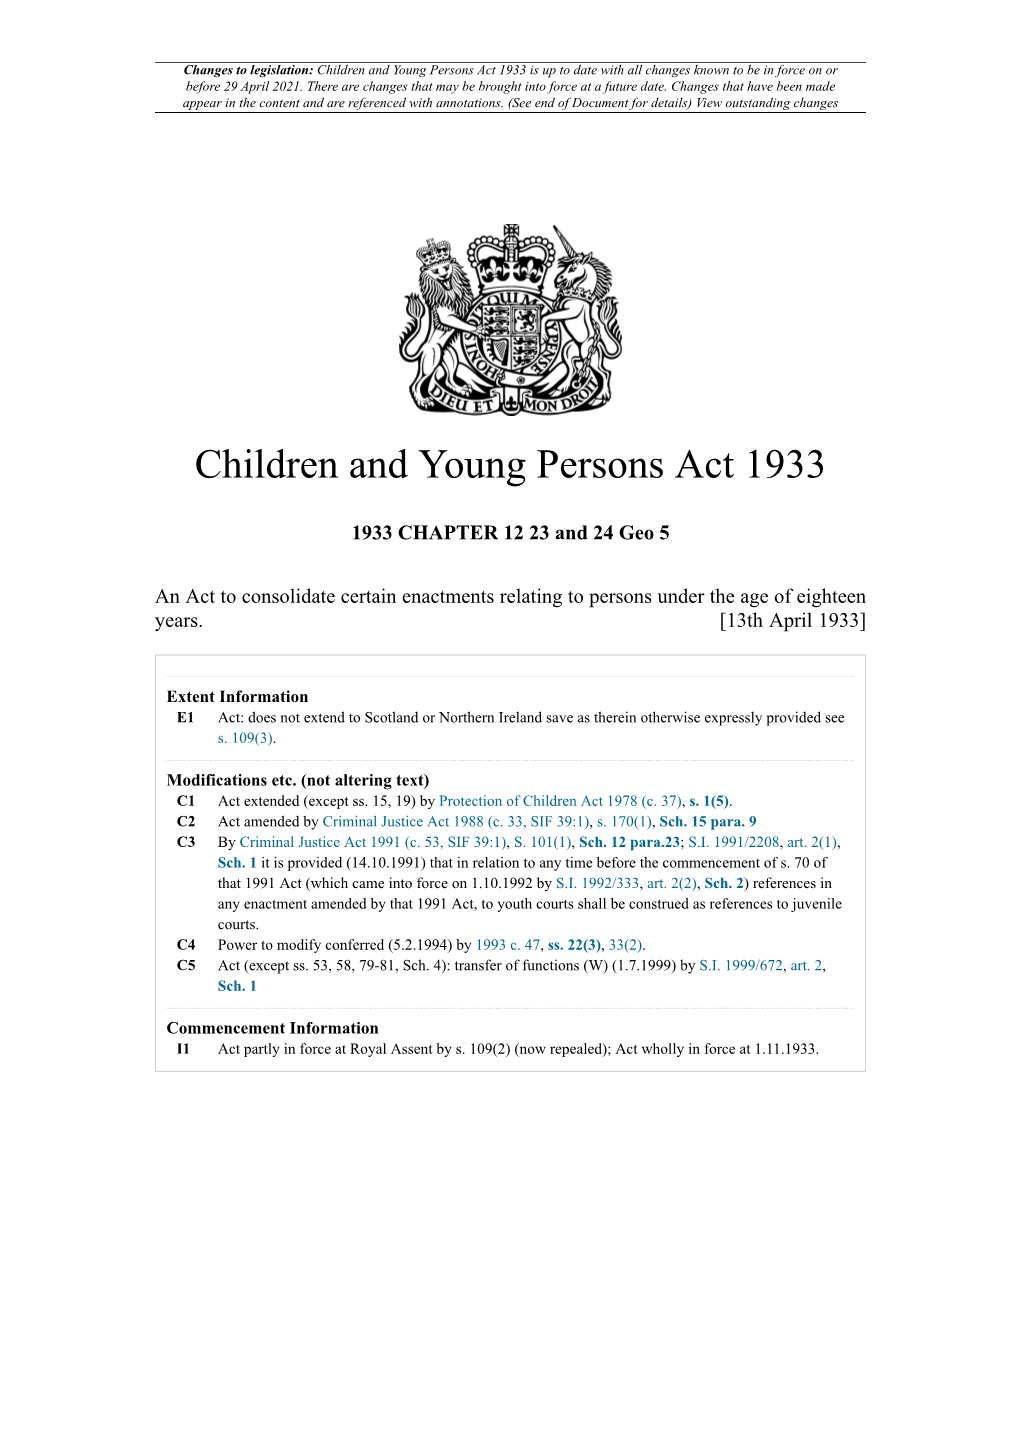 Children and Young Persons Act 1933 Is up to Date with All Changes Known to Be in Force on Or Before 29 April 2021